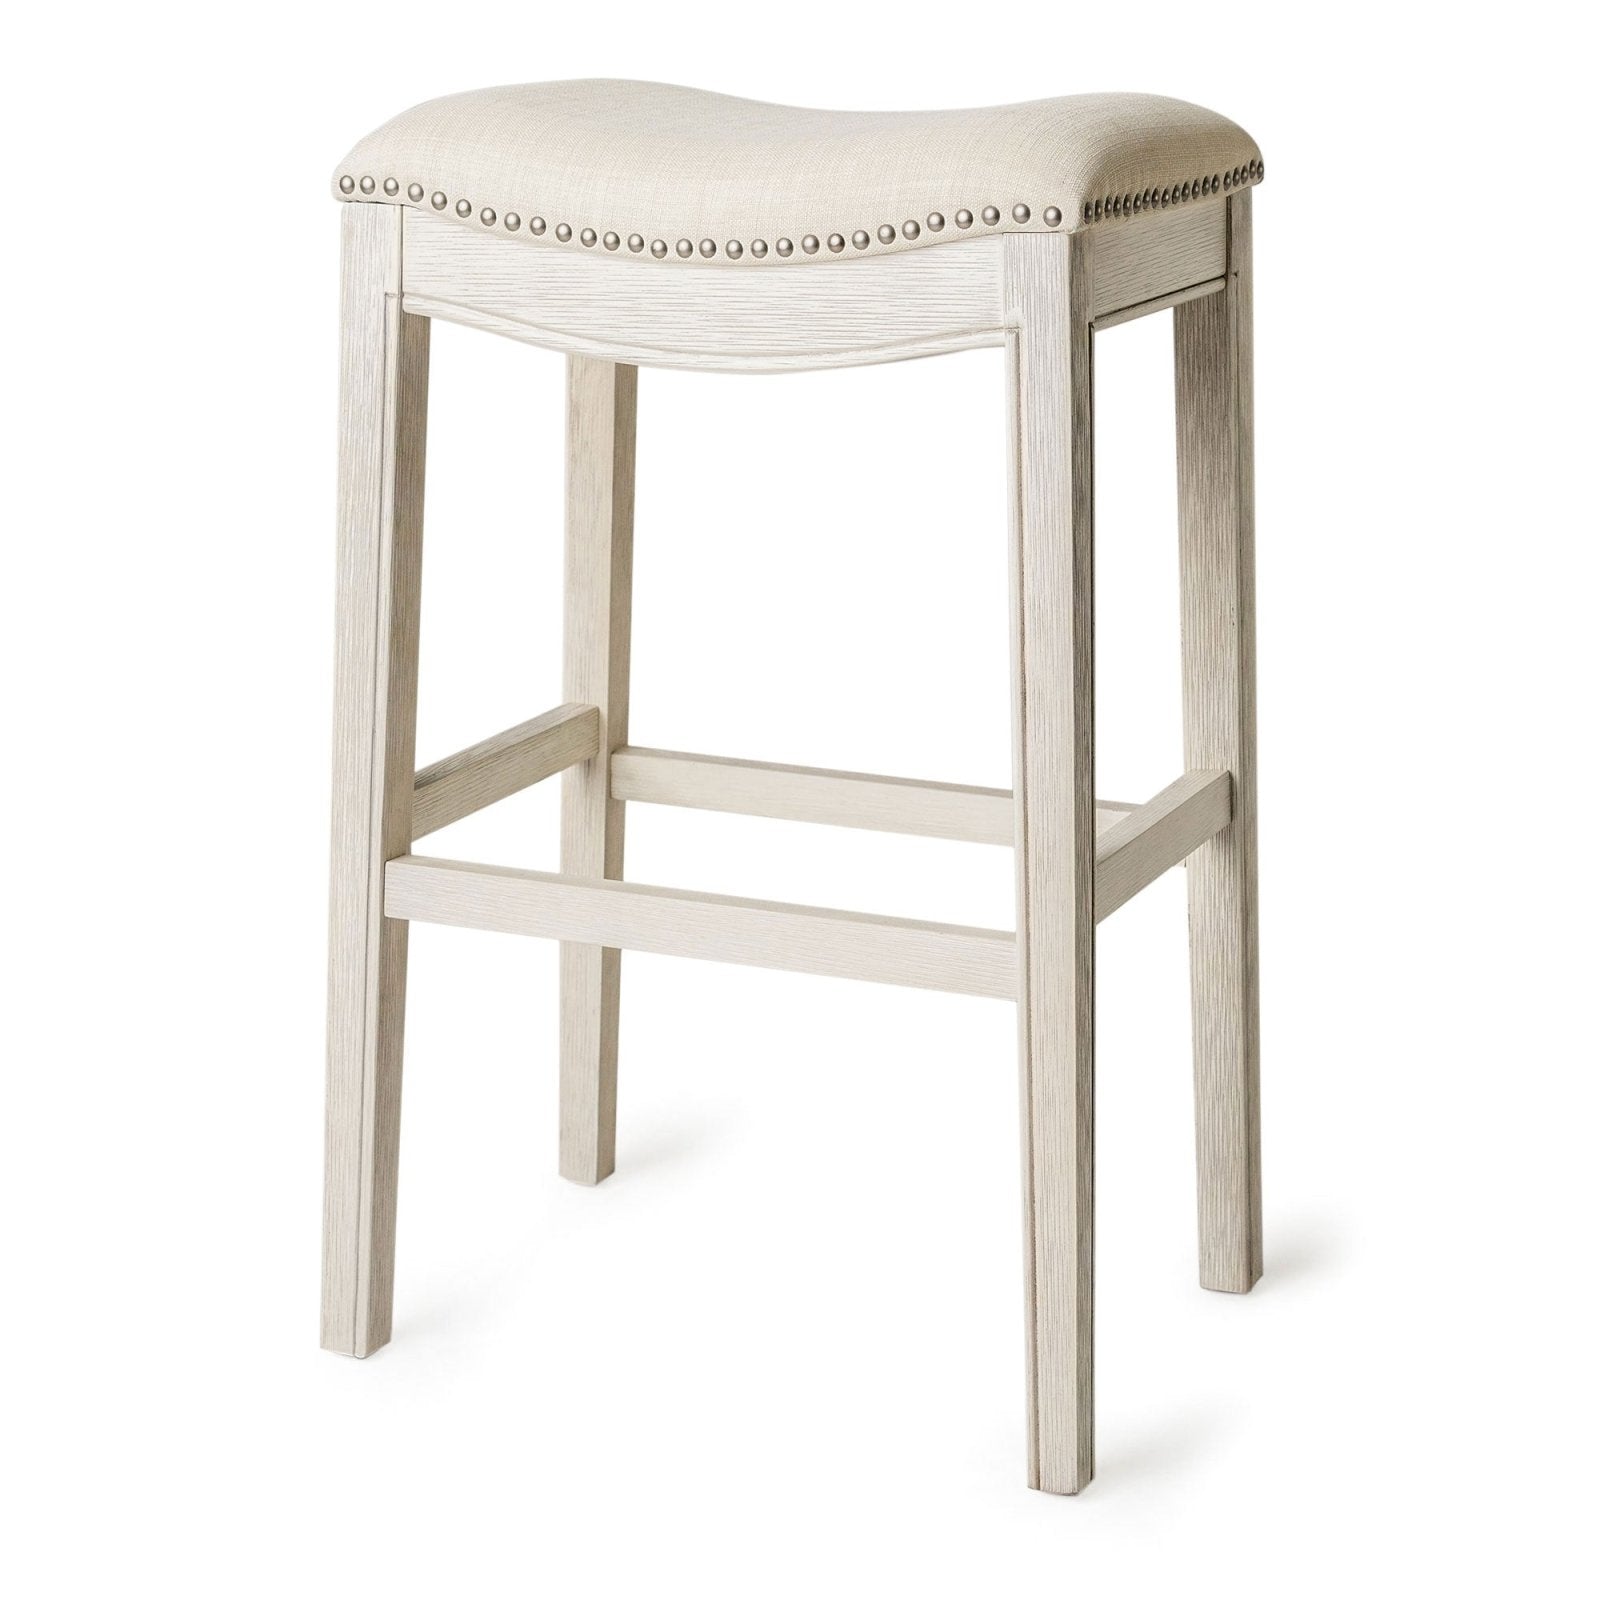 Adrien Saddle Bar Stool in White Oak Finish w/ Natural Fabric Upholstery